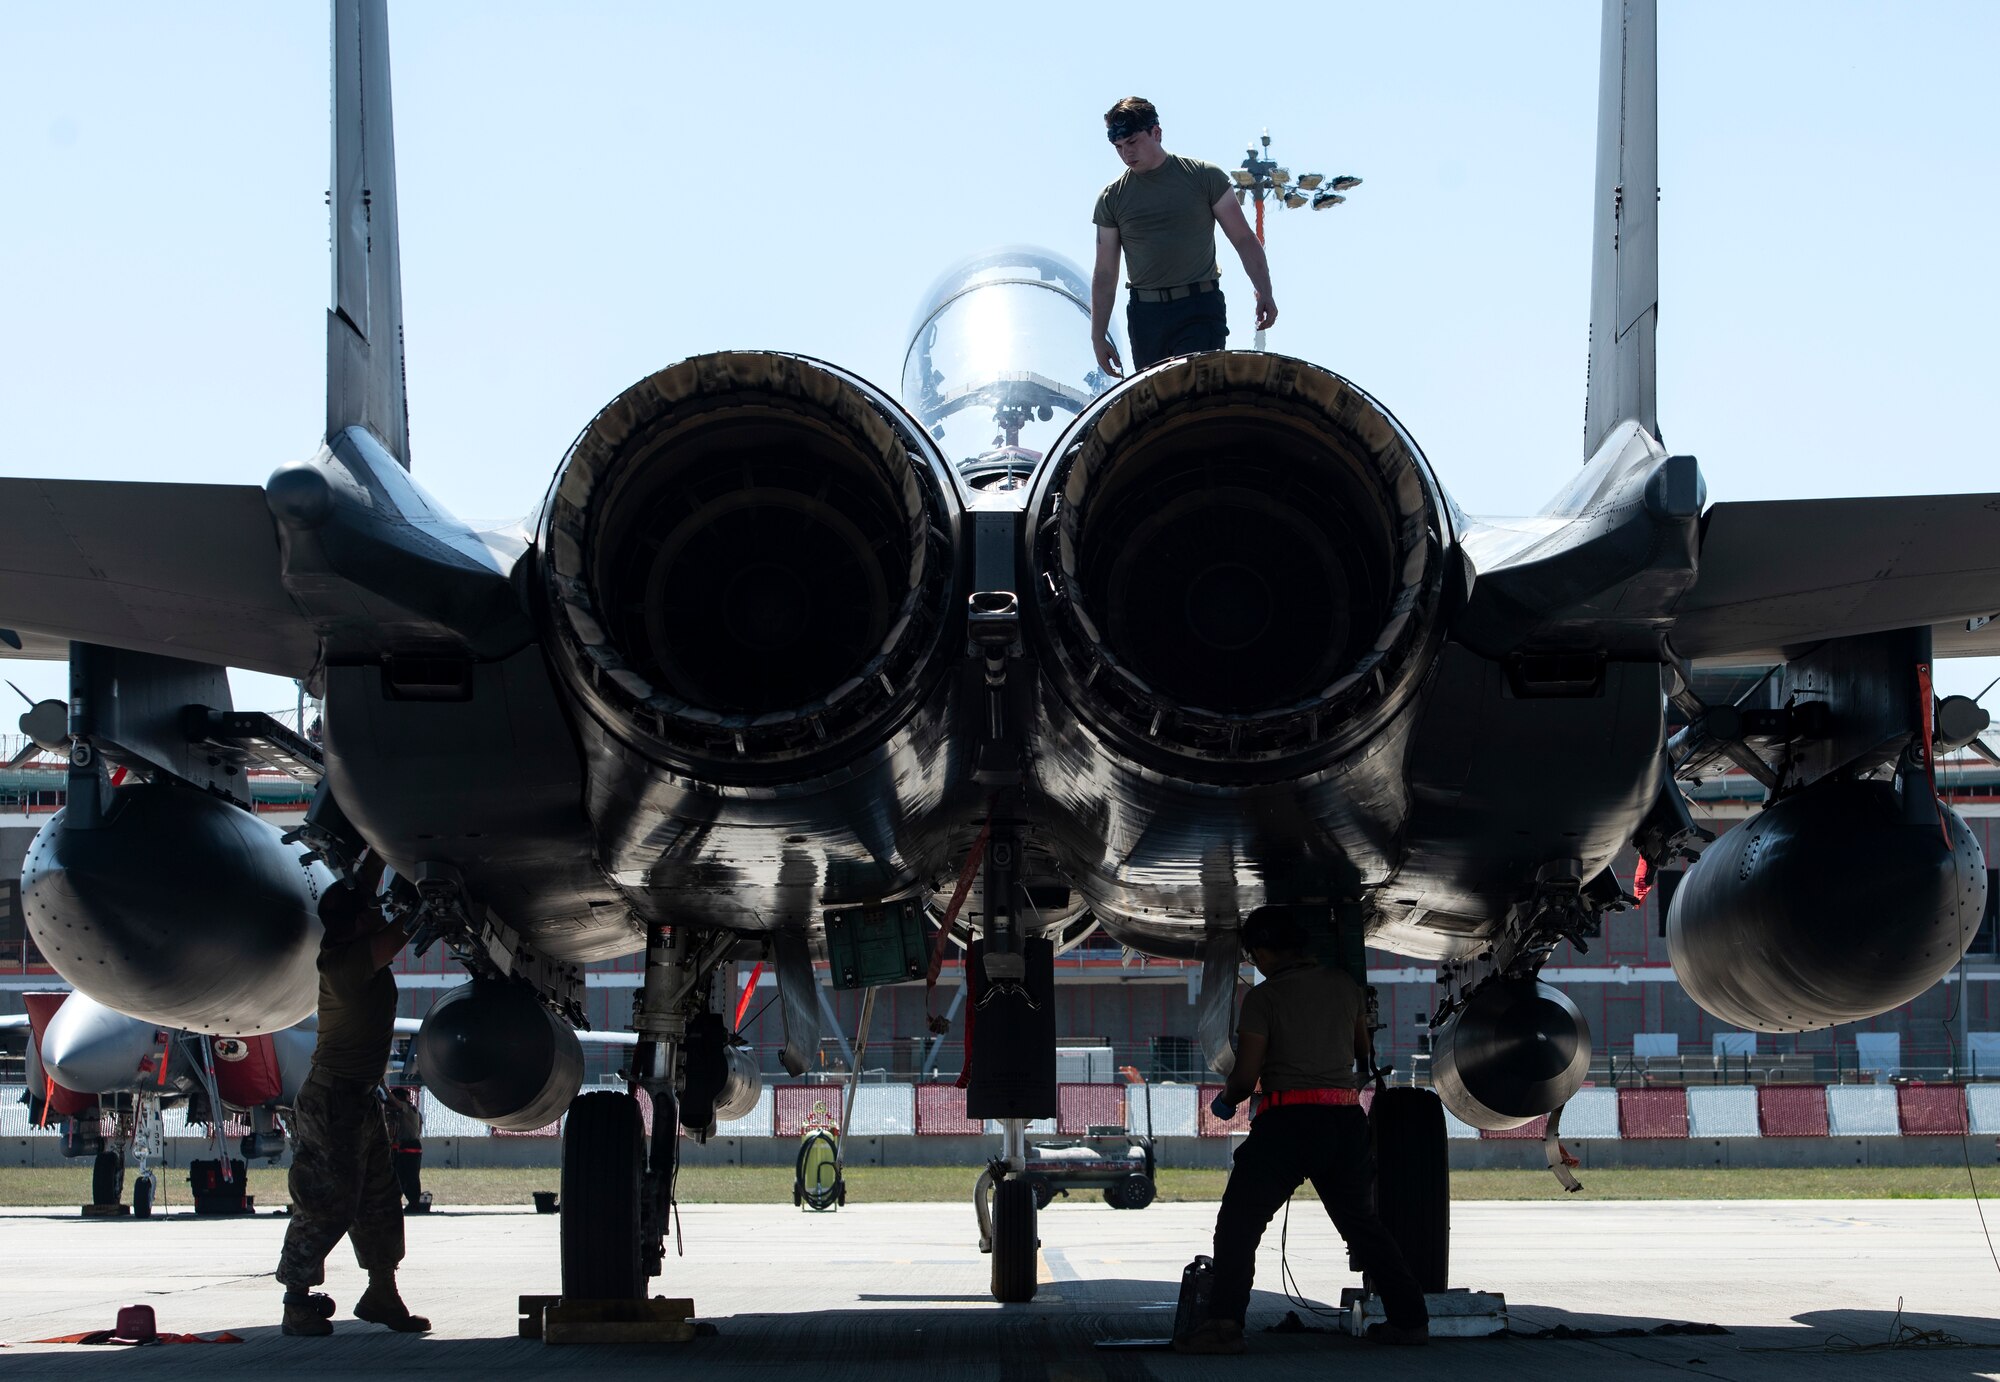 U.S. Air Force crew chiefs, assigned to the 48th Aircraft Maintenance Squadron, work together to recover an F-15E Strike Eagle at Royal Air Force Lakenheath, England, Aug. 7, 2020. 48th AMXS Airmen ensure Liberty Wing F-15s are fit to fly and can continue to provide superior airpower capabilities when called upon. (U.S. Air Force photo by Airman 1st Class Jessi Monte)